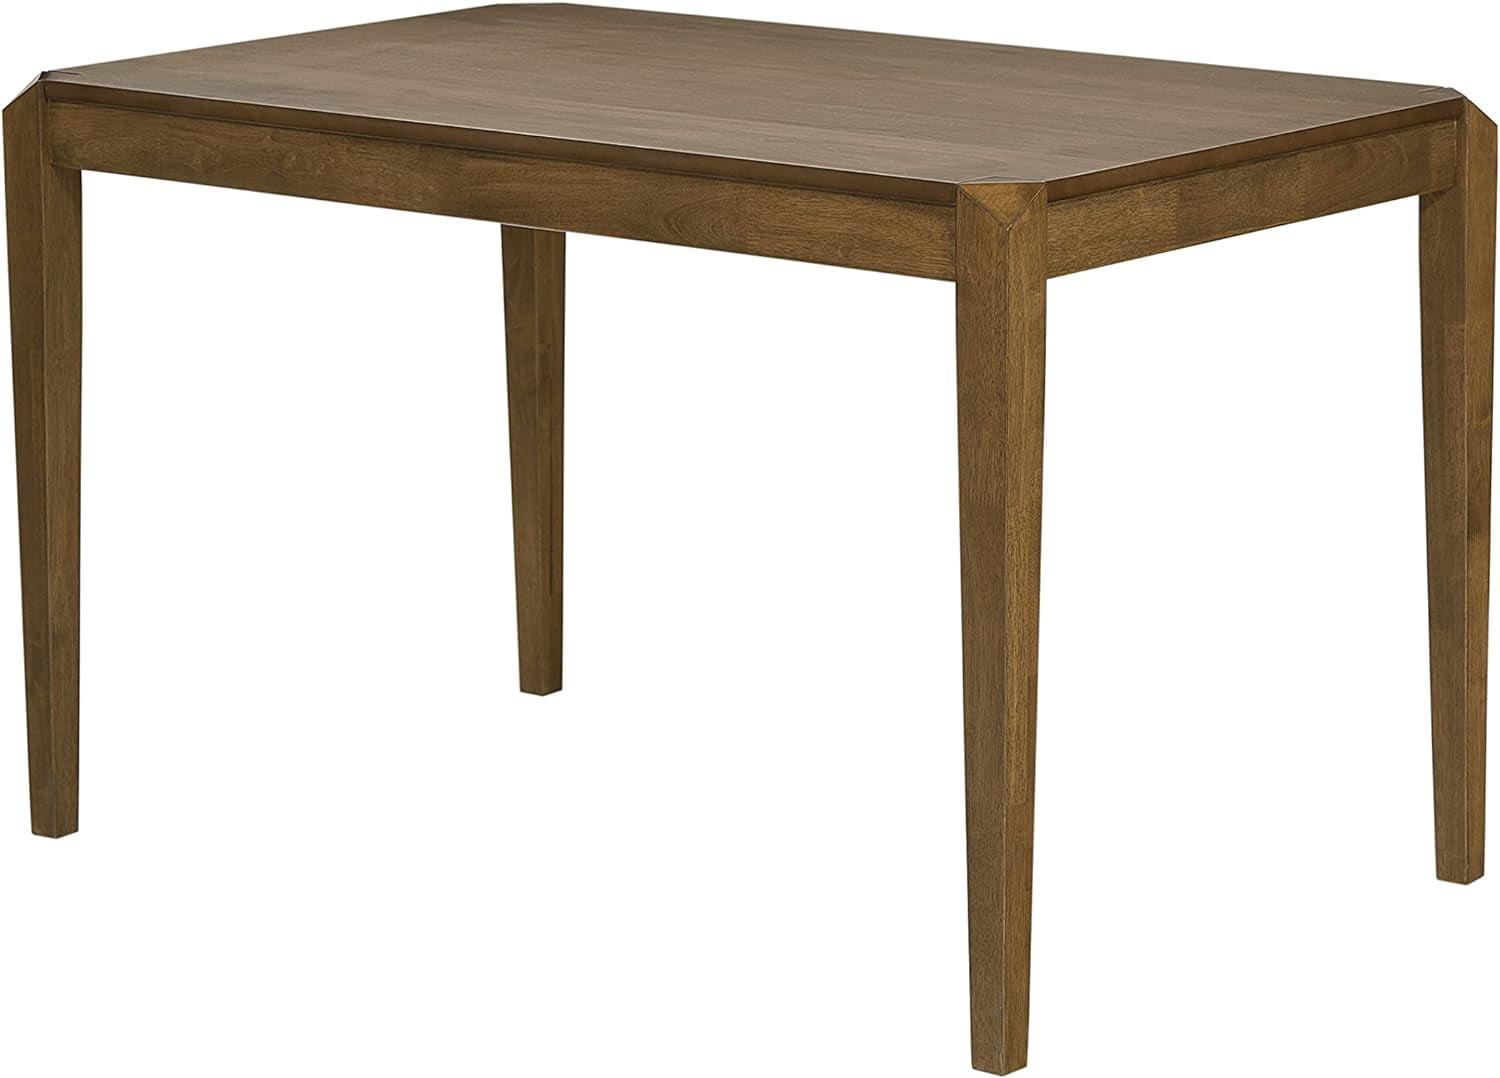 Transitional Walnut Brown Extendable Dining Table